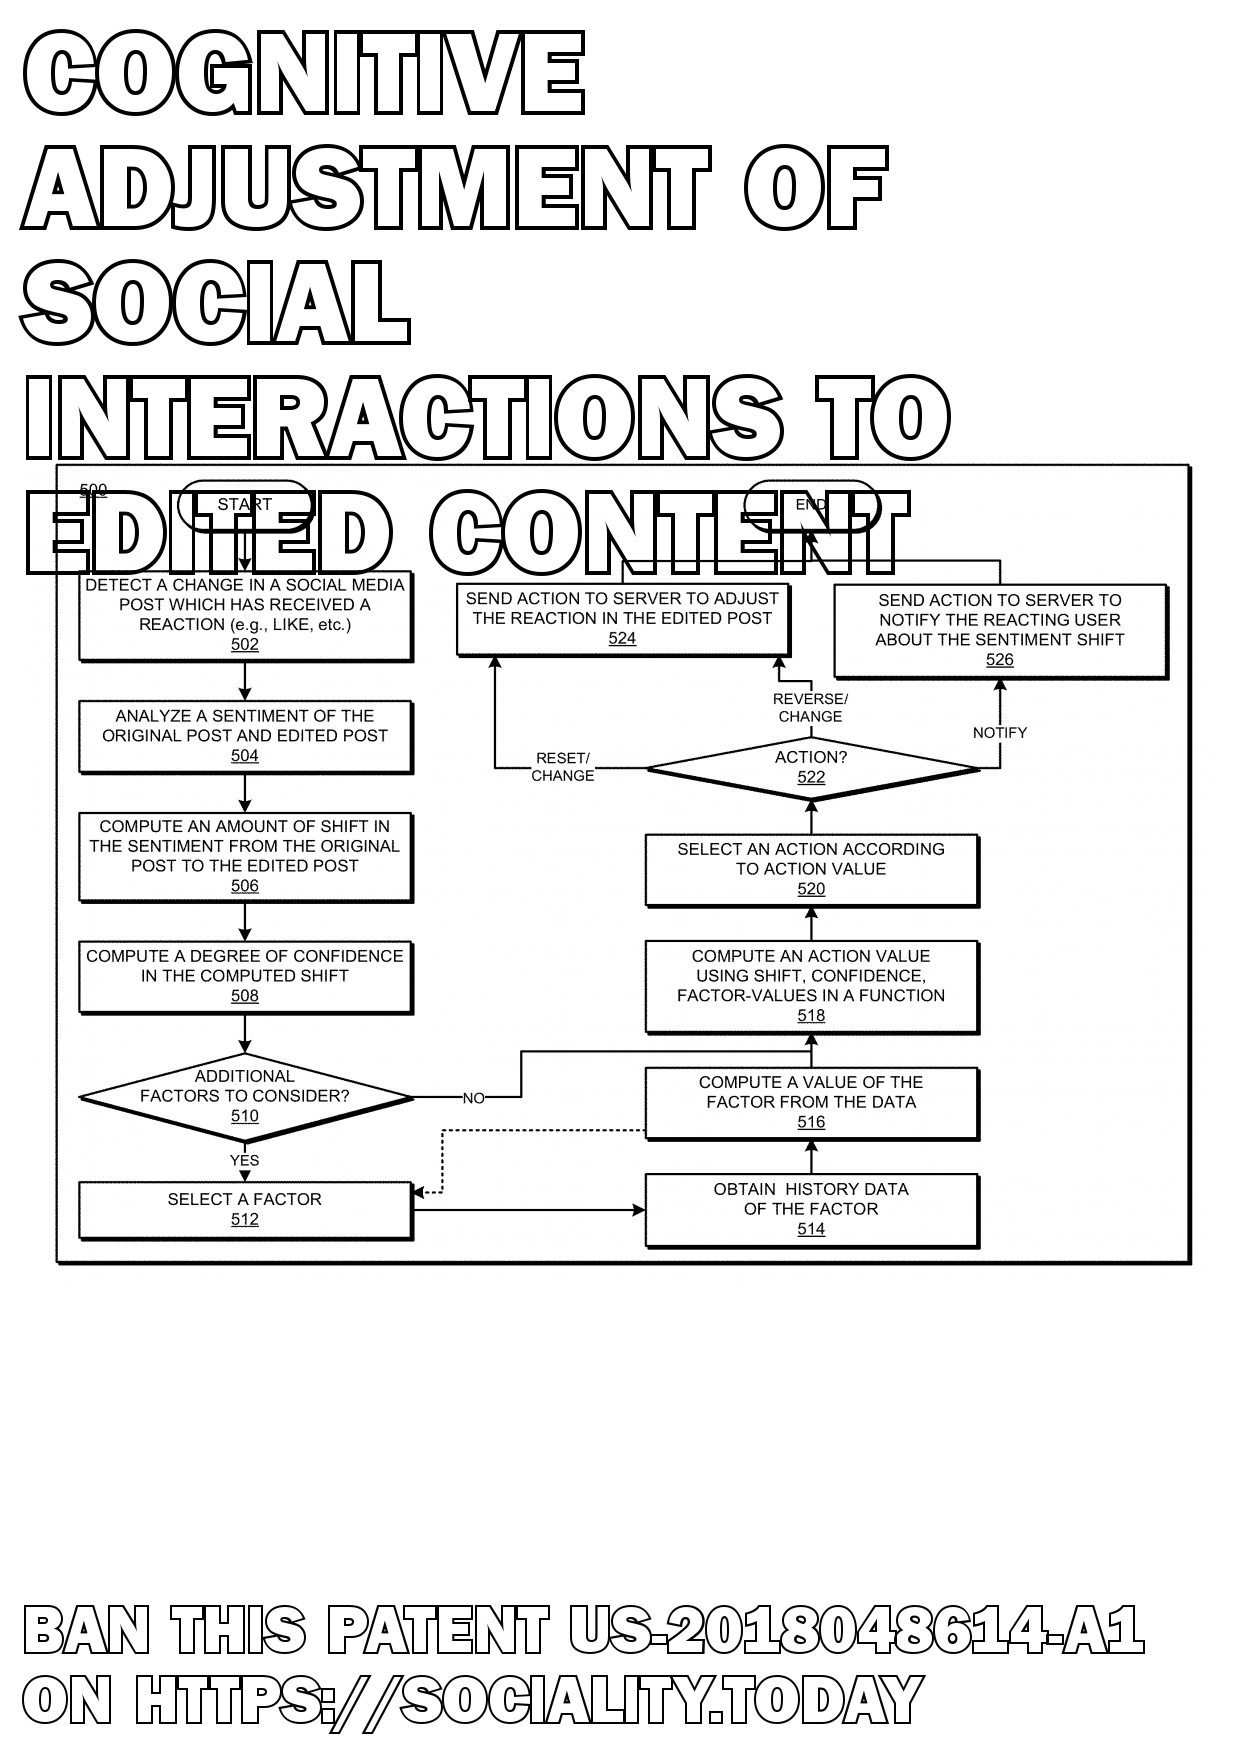 Cognitive adjustment of social interactions to edited content  - US-2018048614-A1